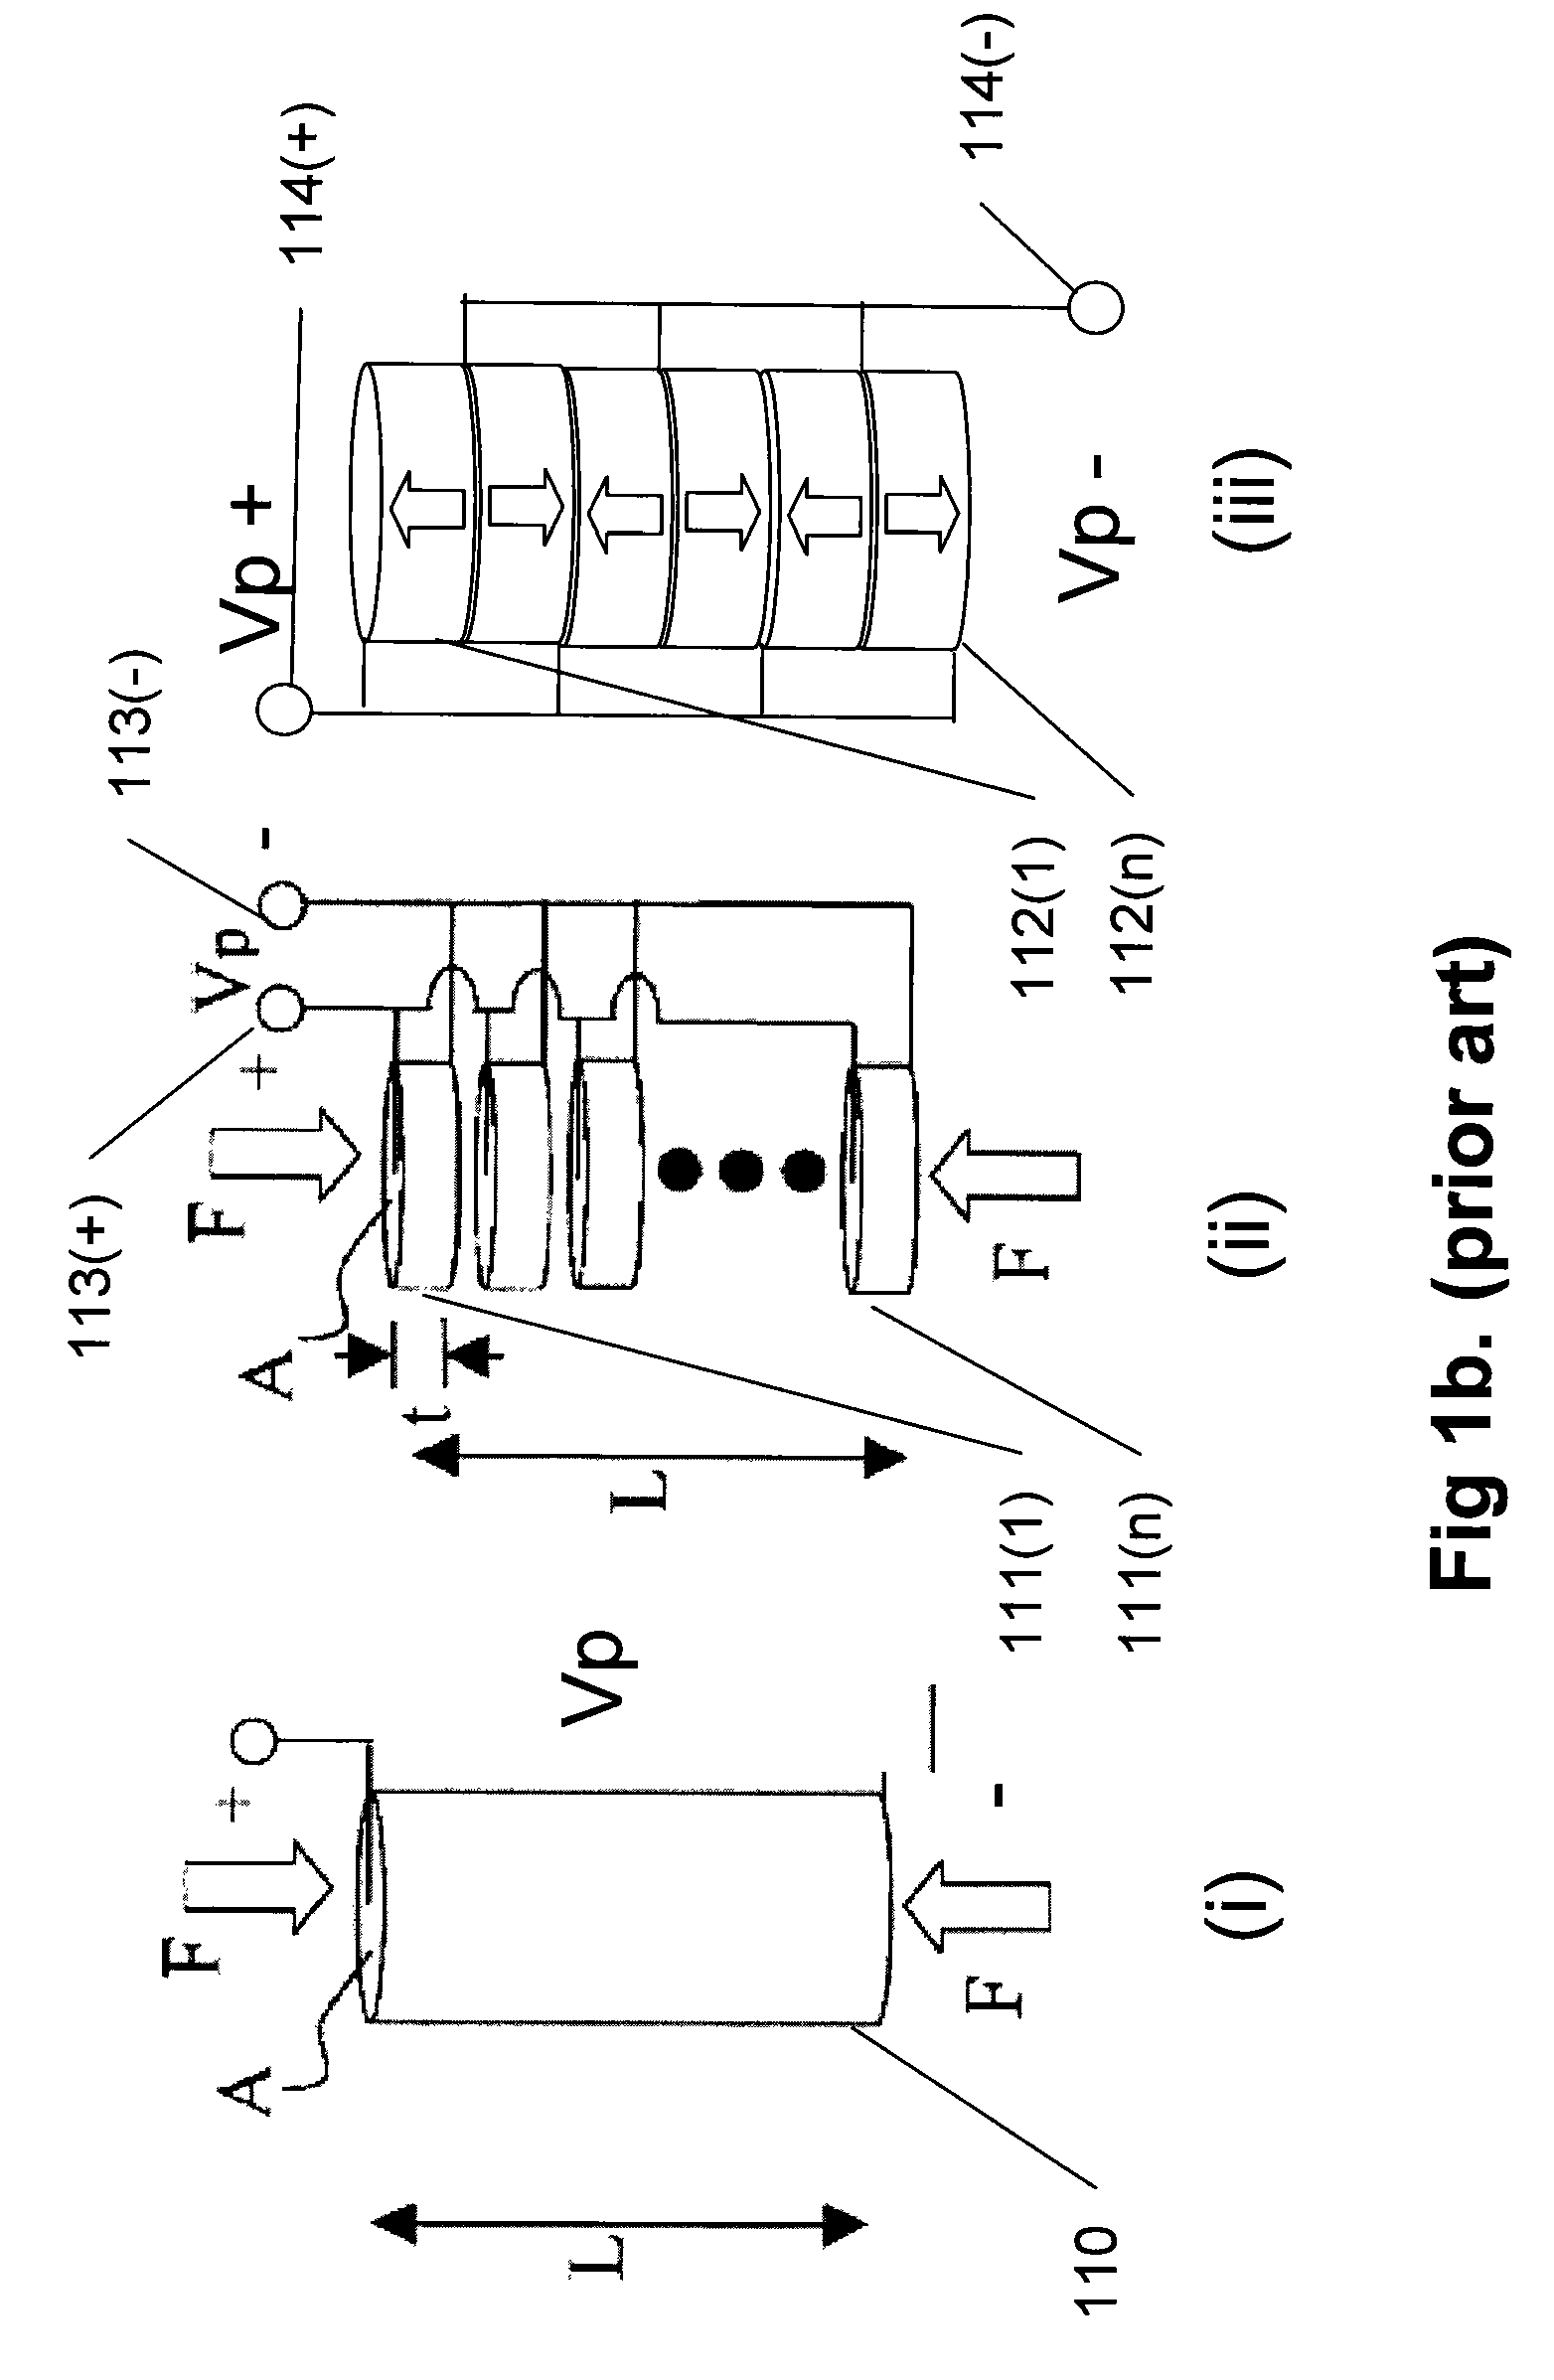 Power harvesting apparatus, system and method